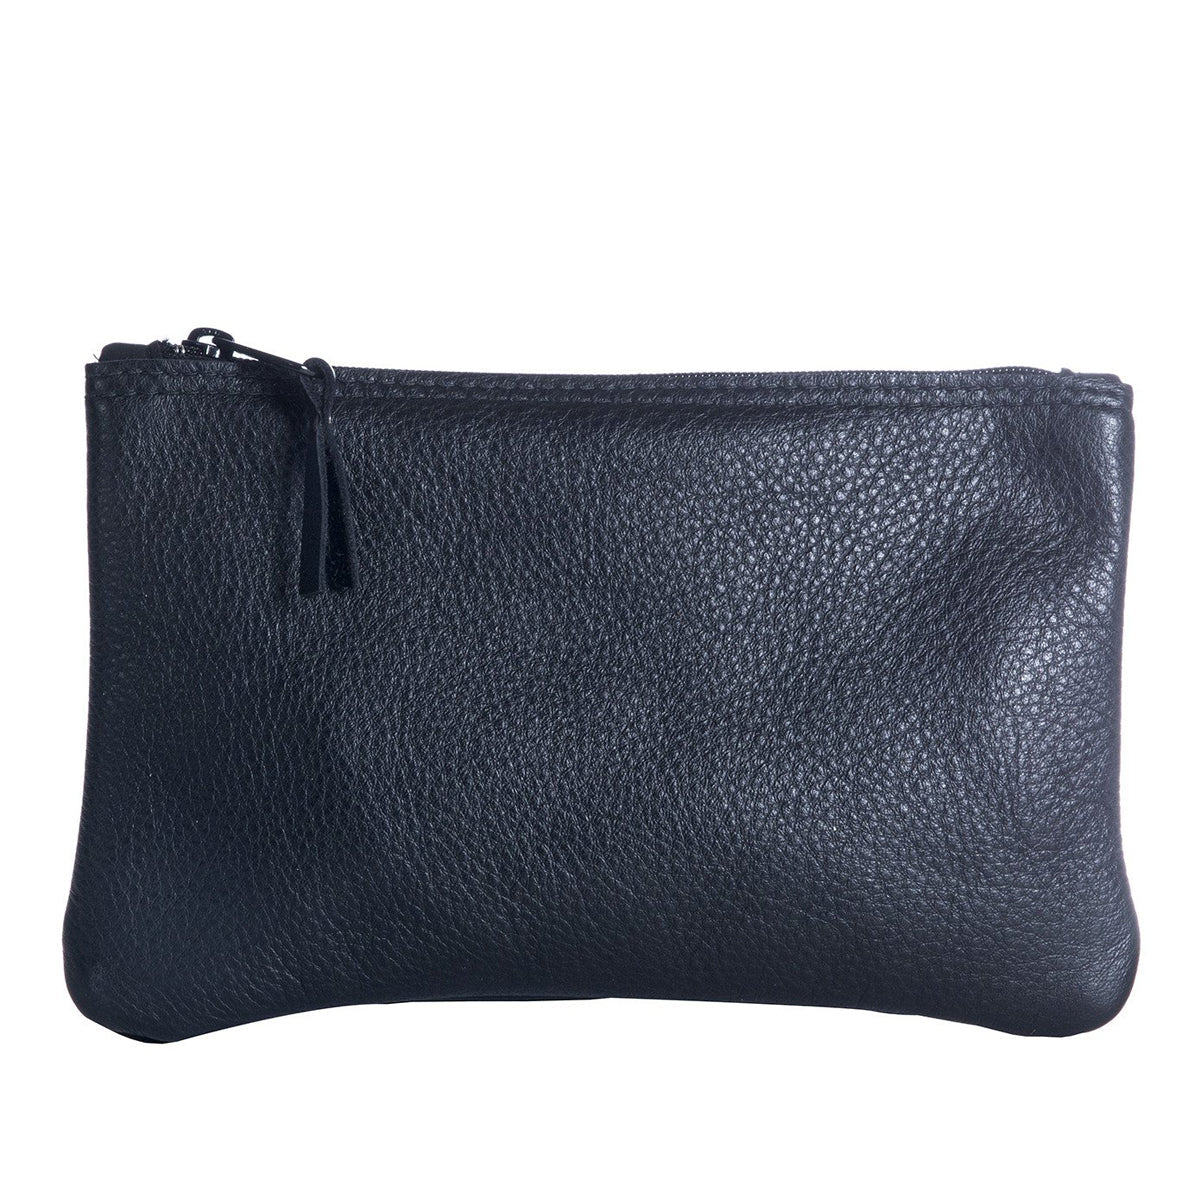 Black leather zipper pouch handmade in the USA by Vicki Jean.